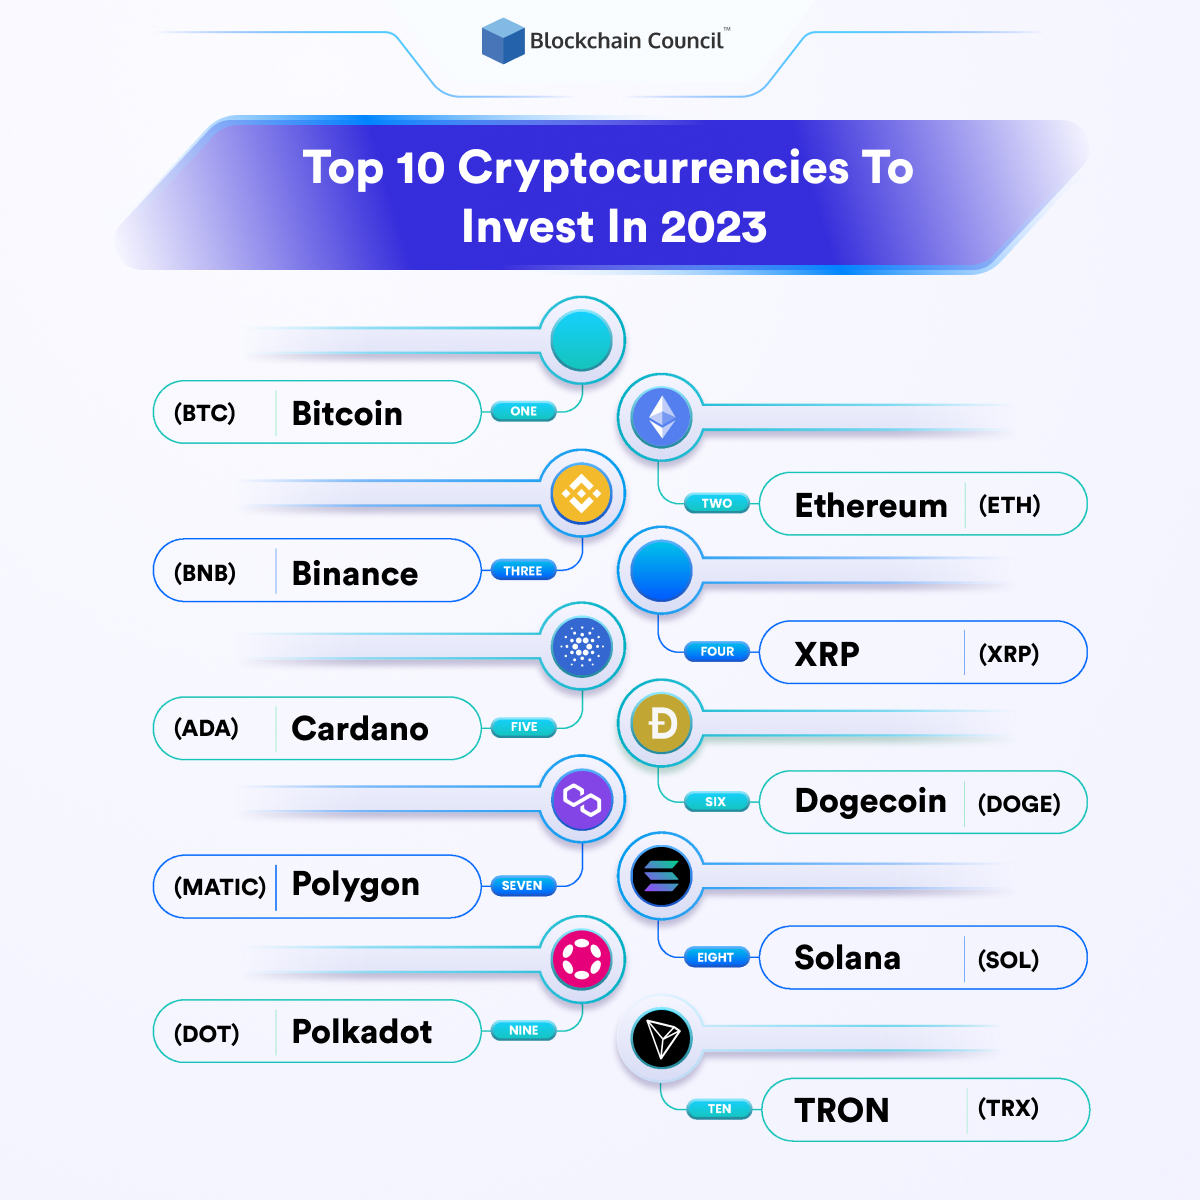 Top 10 Cryptocurrency to Invest in 2023